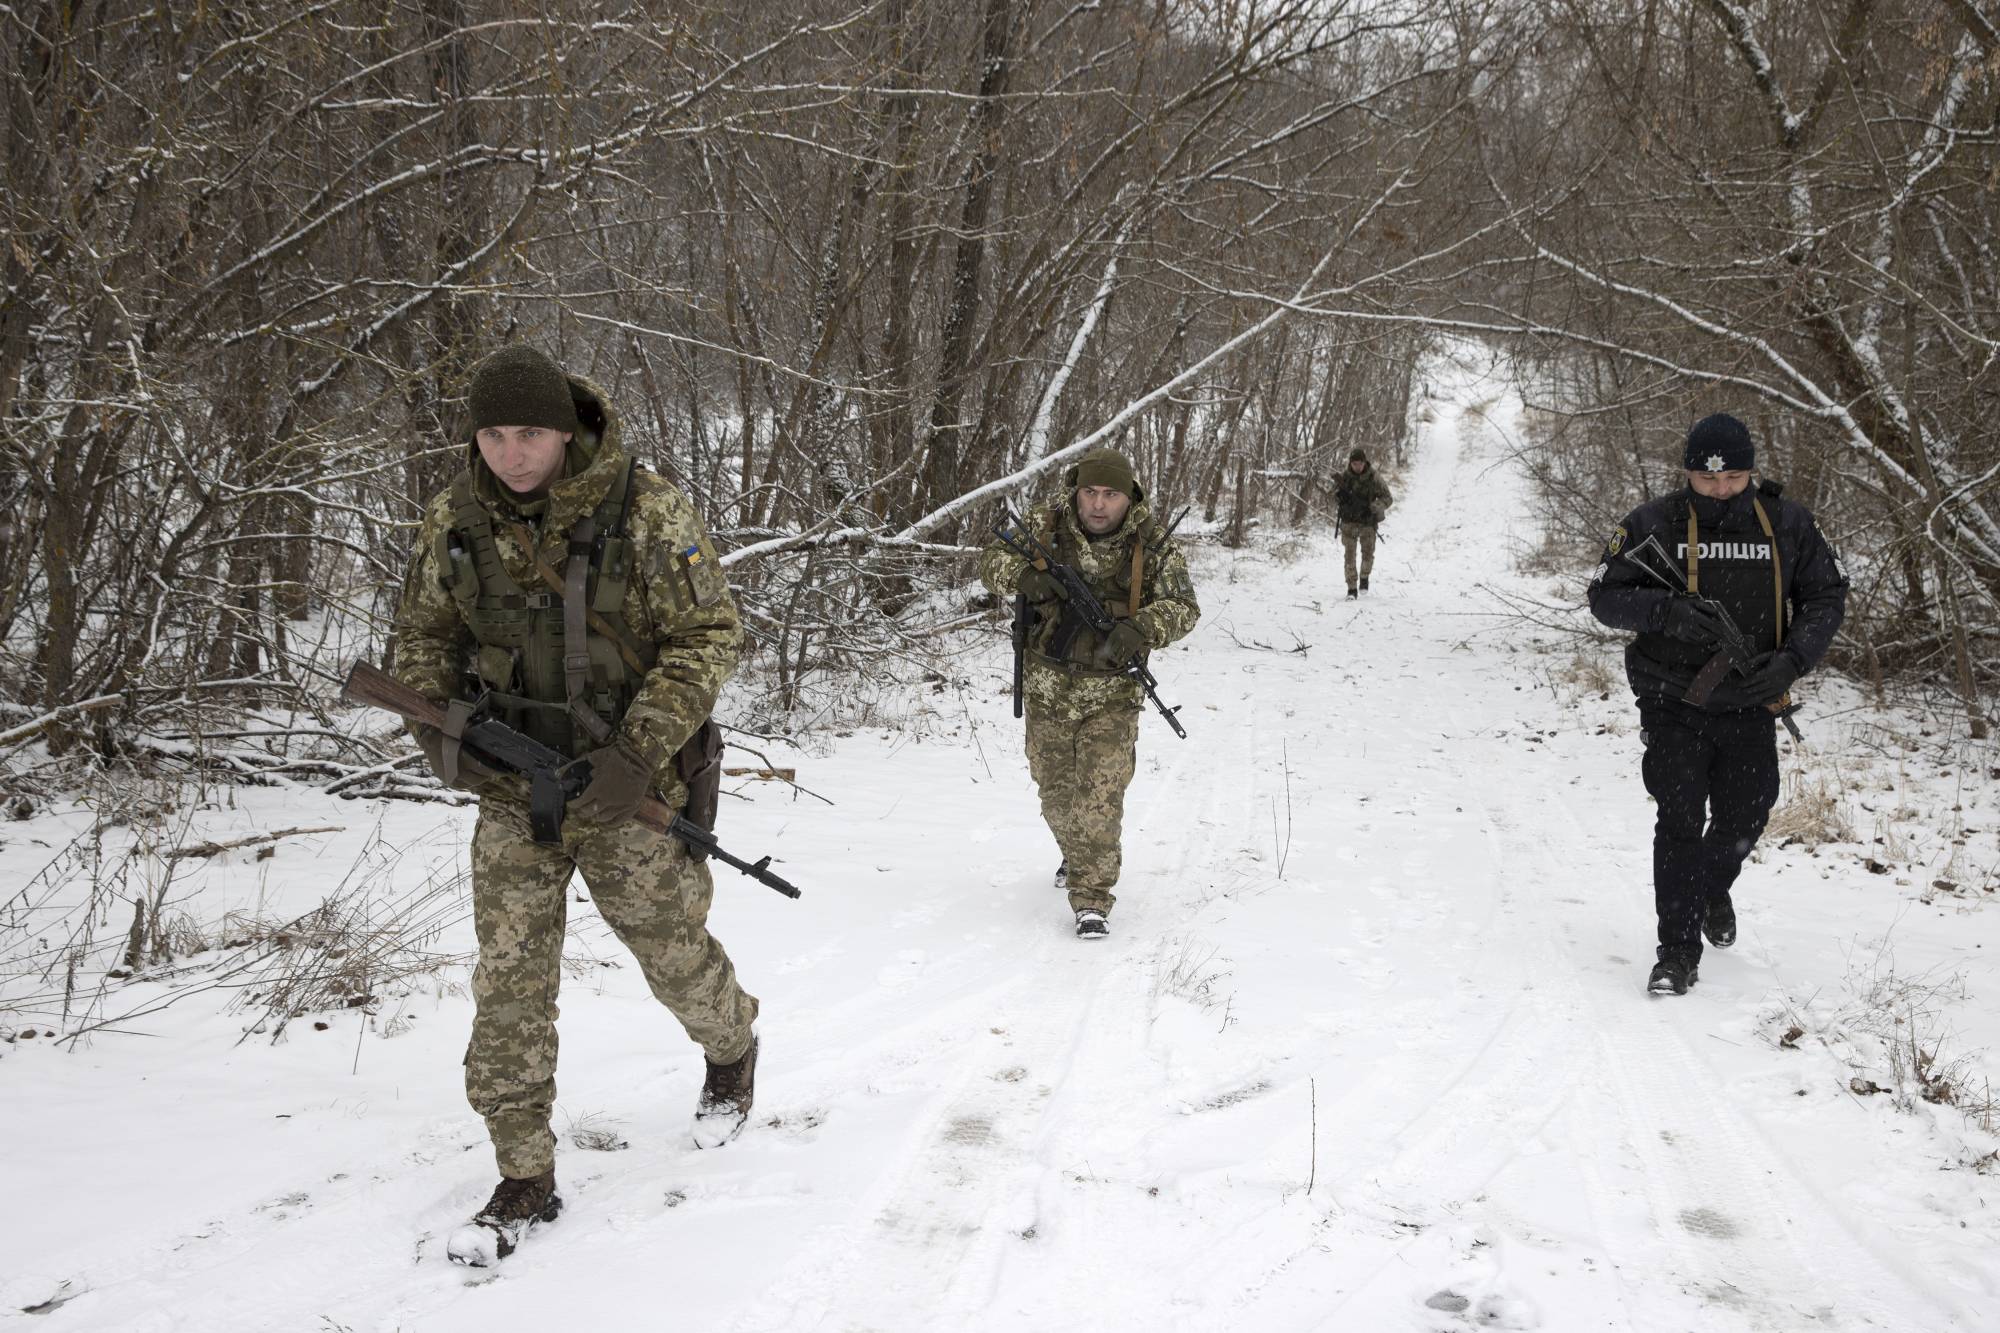 Ukrainian border guards on a joint patrol near the border with Belarus on Jan. 9. | TYLER HICKS / THE NEW YORK TIMES